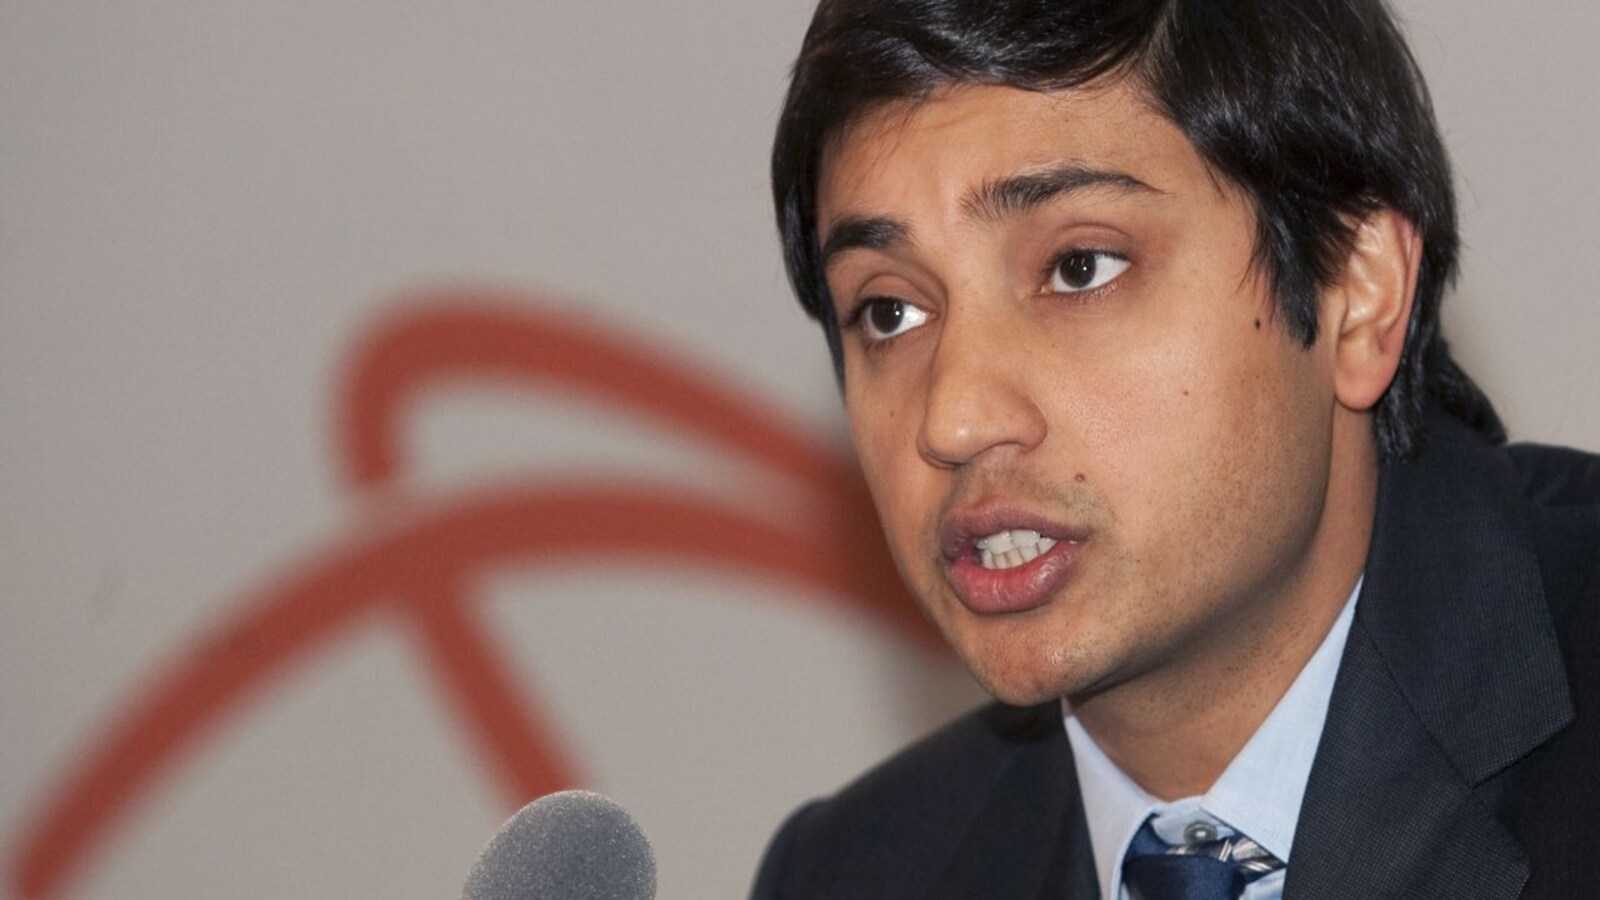 ArcelorMittal appoints Aditya Mittal new ceo - EUROMETAL